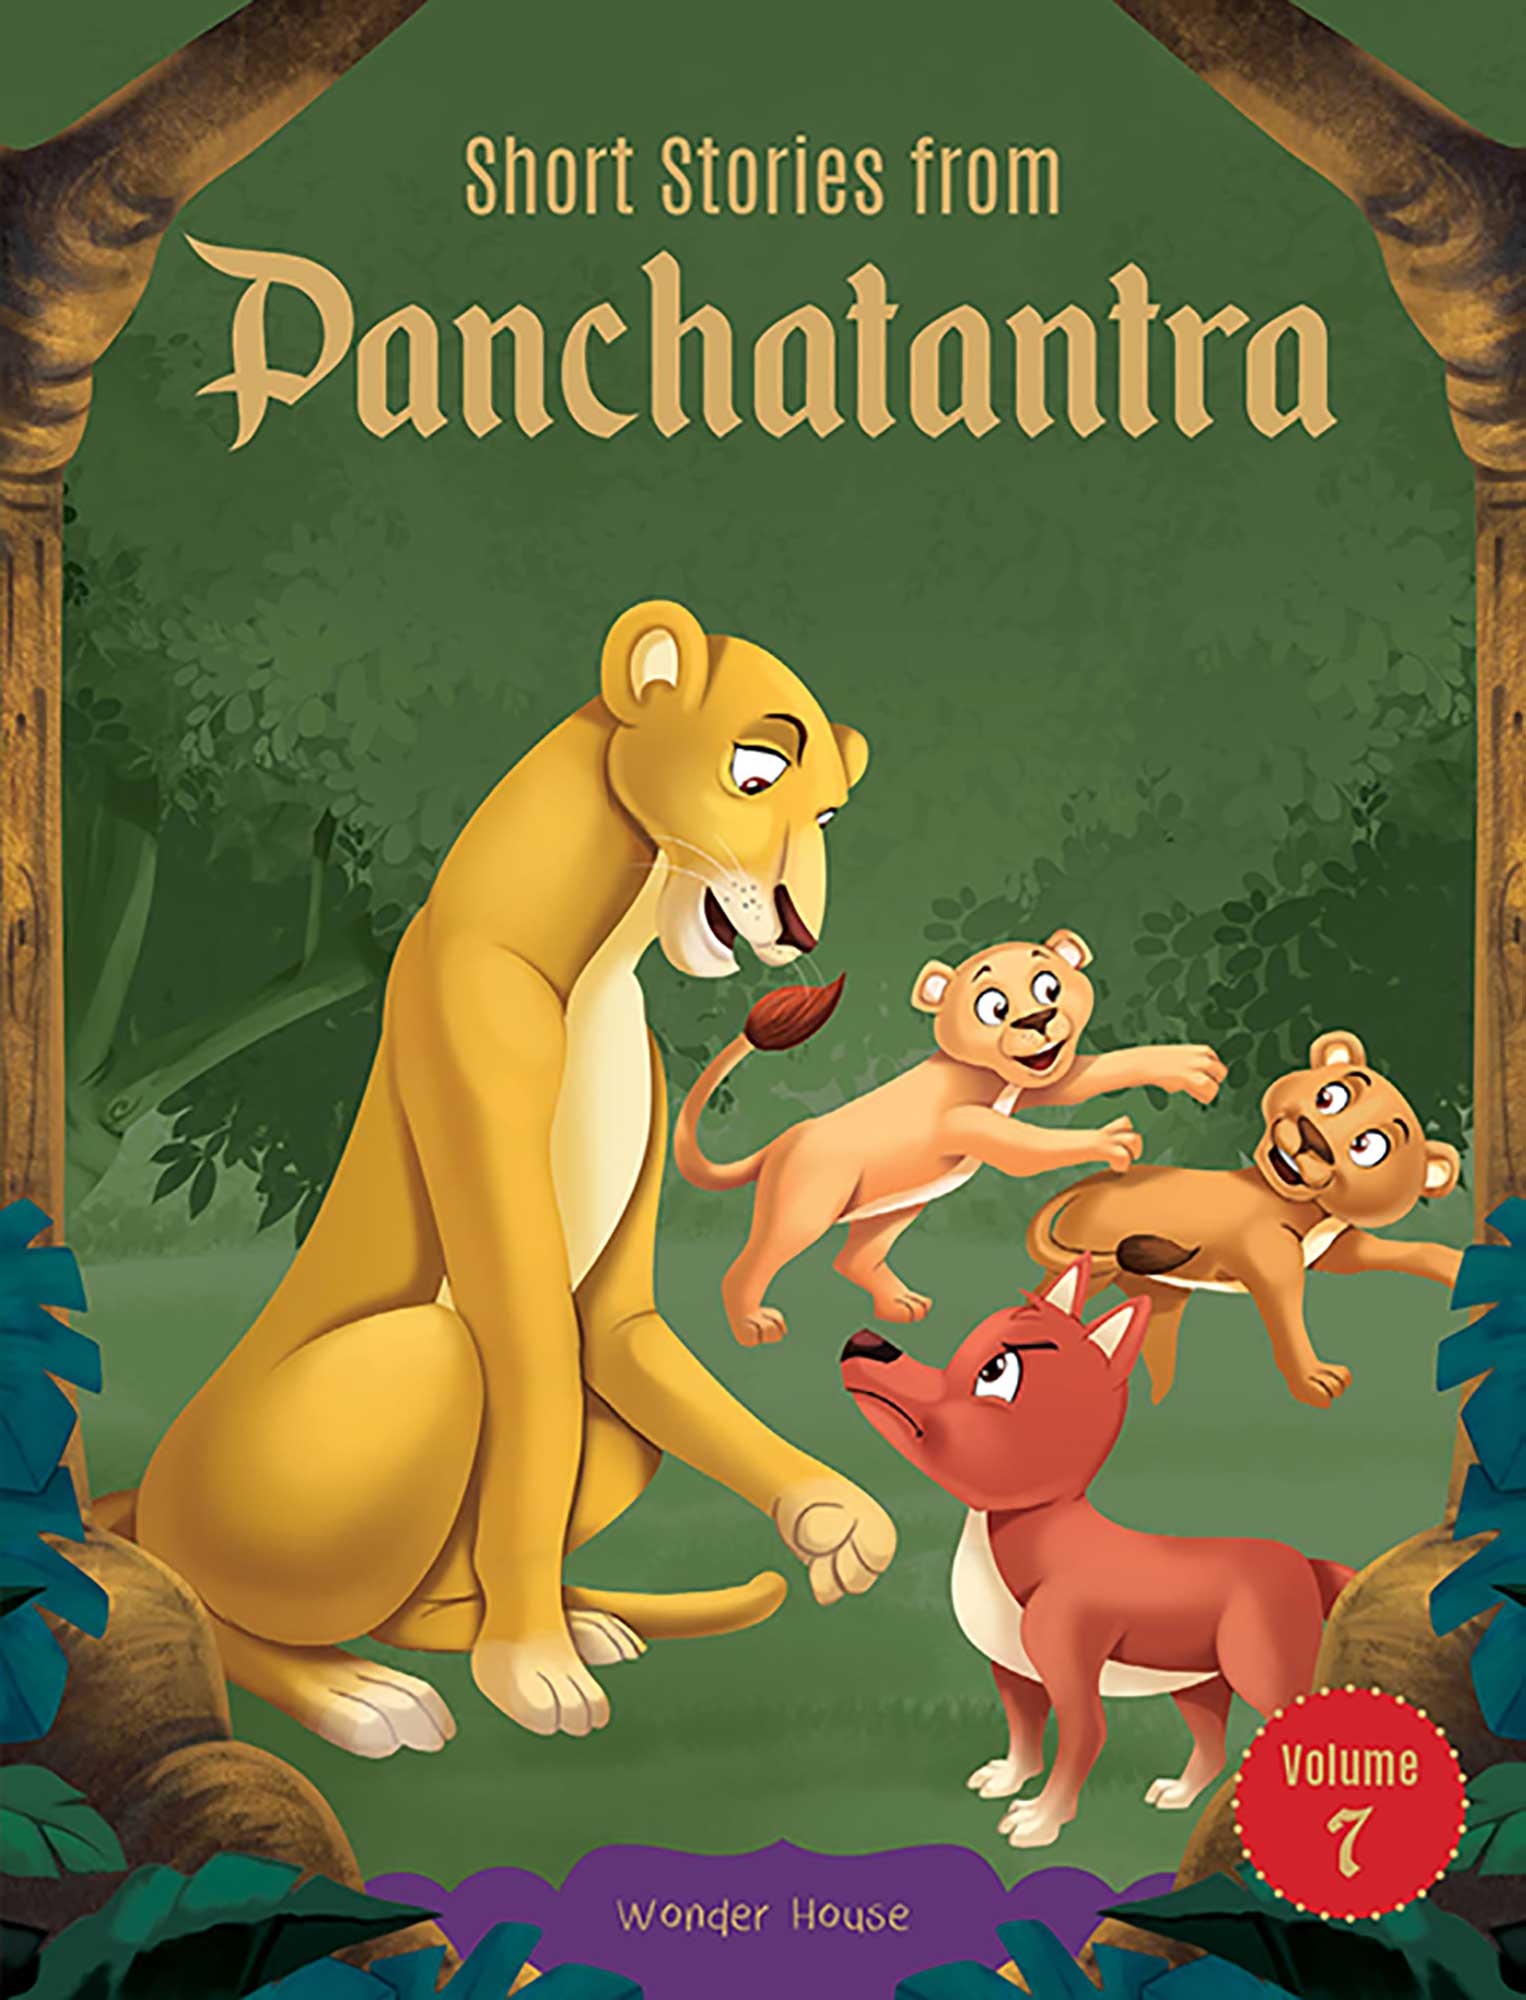 Short Stories From Panchatantra - Volume 7: Abridged Illustrated Stories For Children (With Morals)